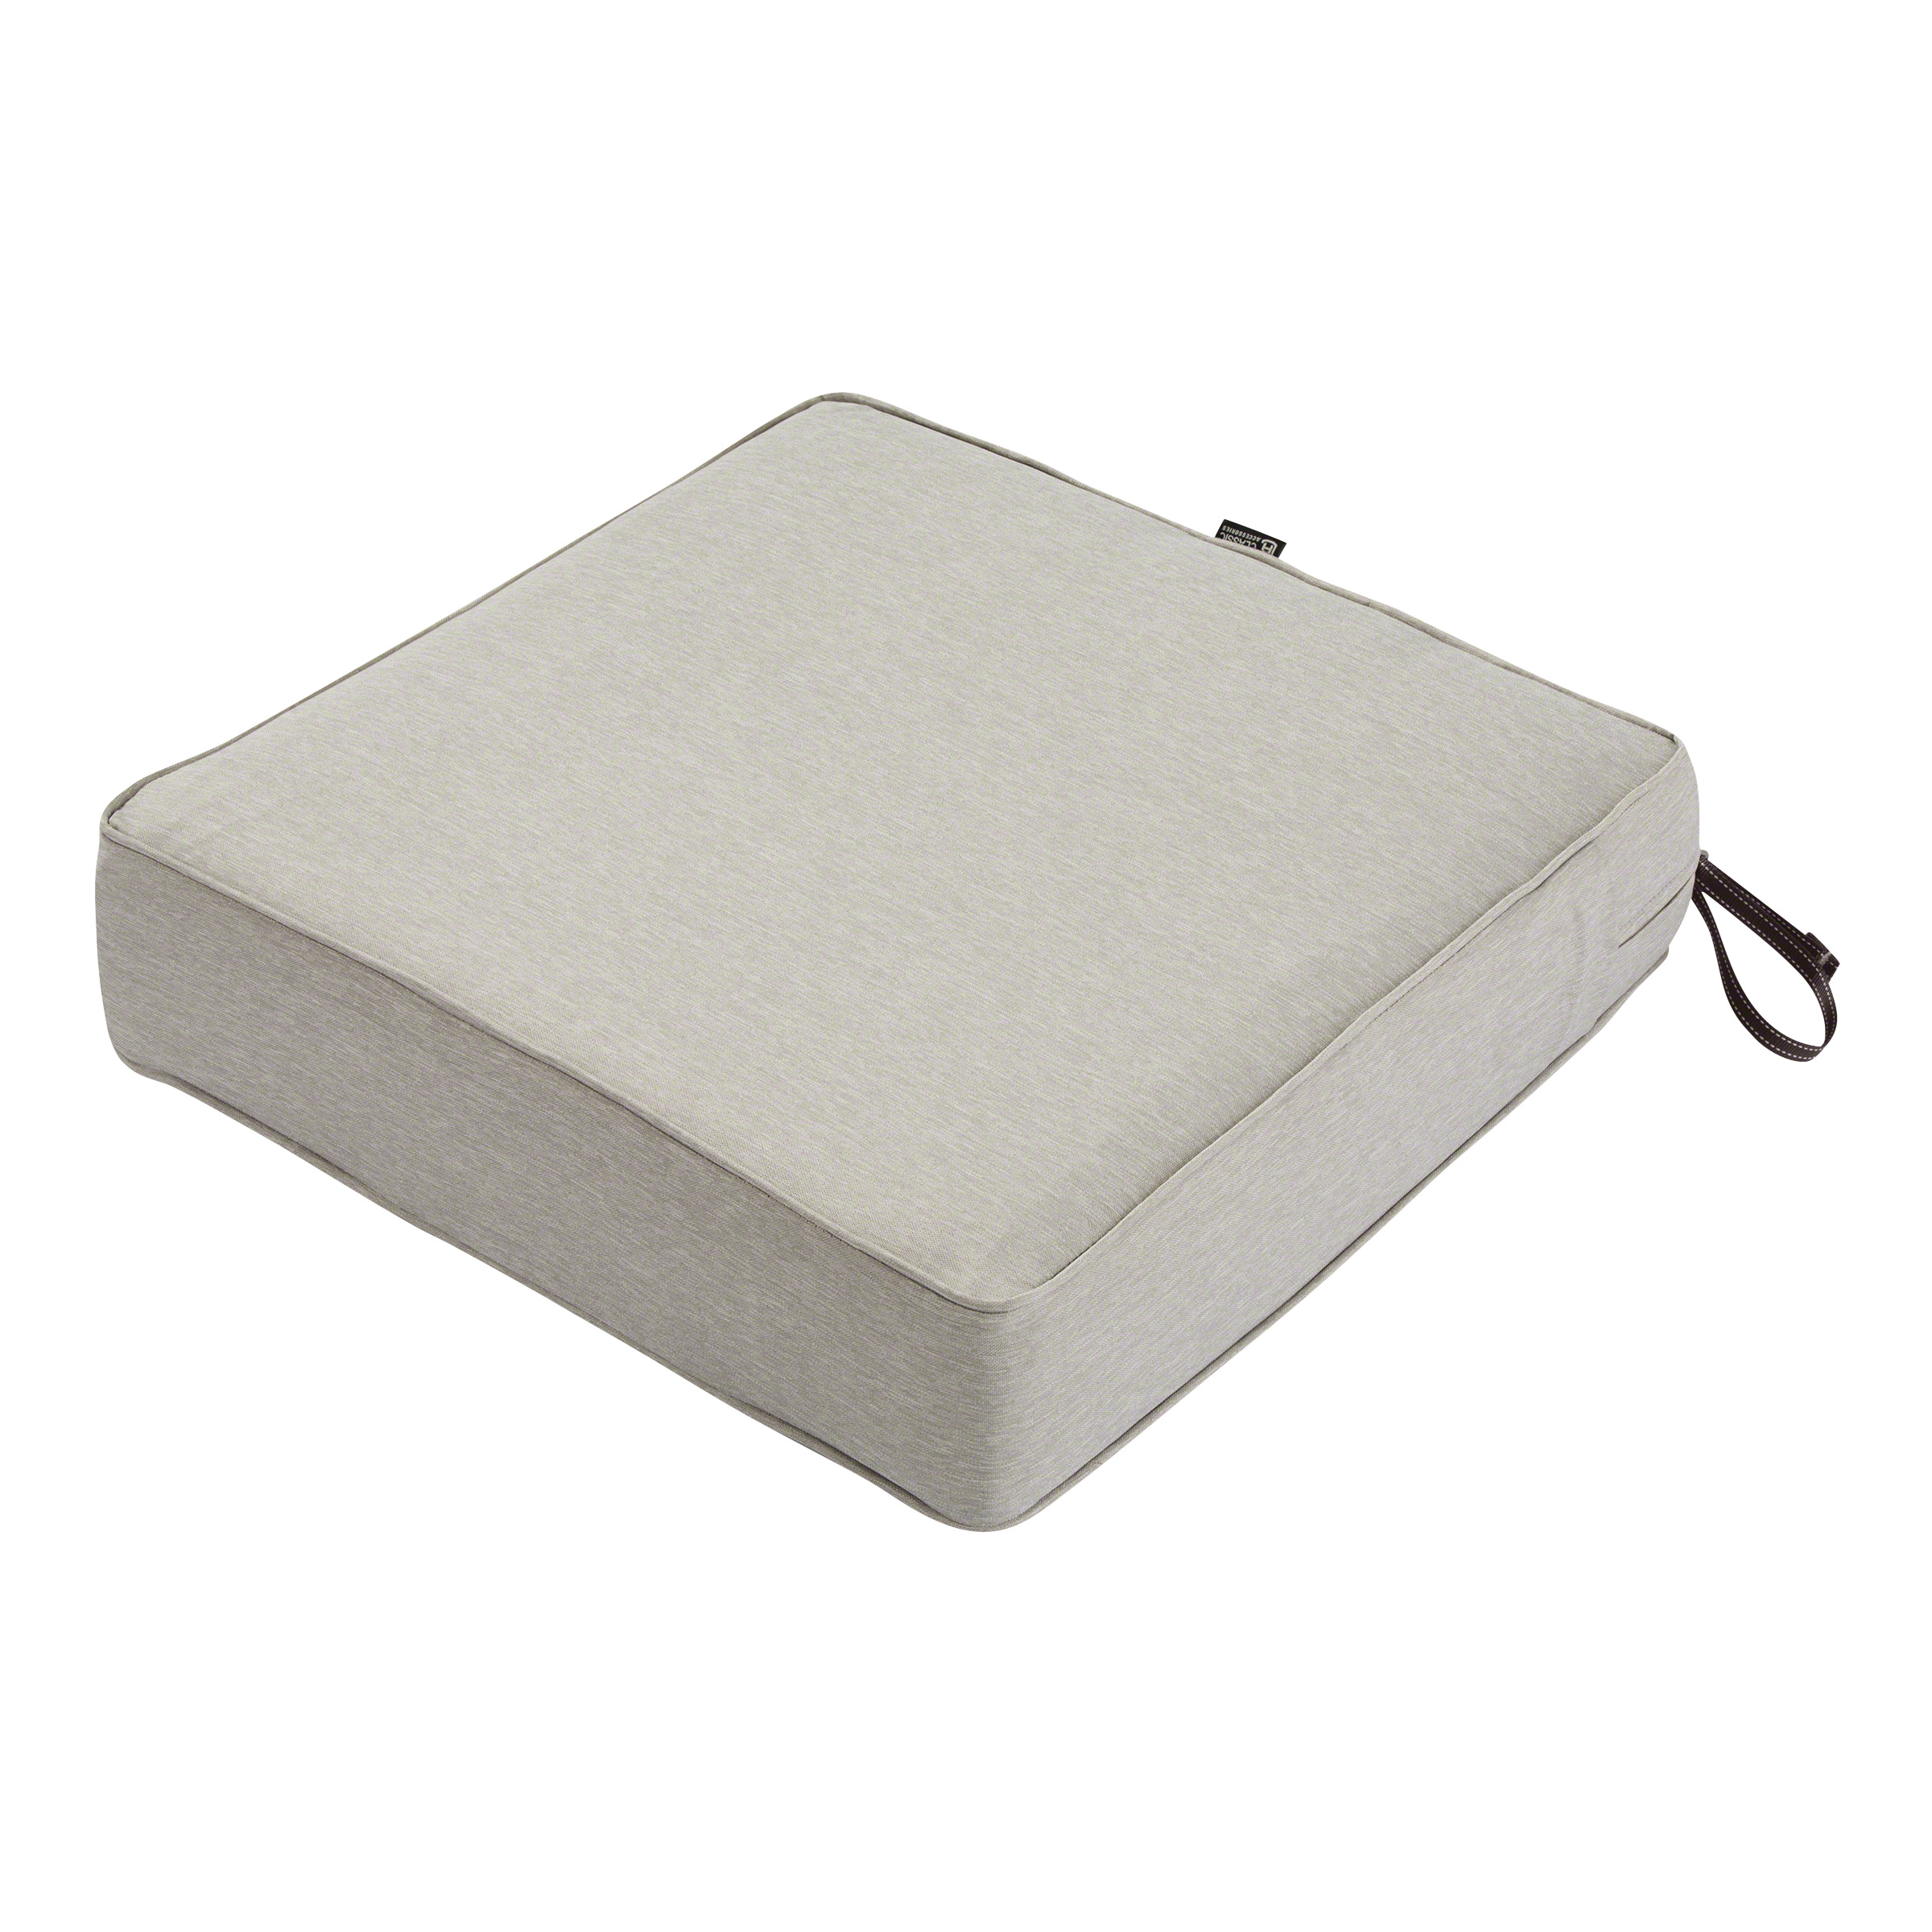 Classic Accessories Square Patio Lounge Seat Cushion, Heather Gray, 23"x23"x5"